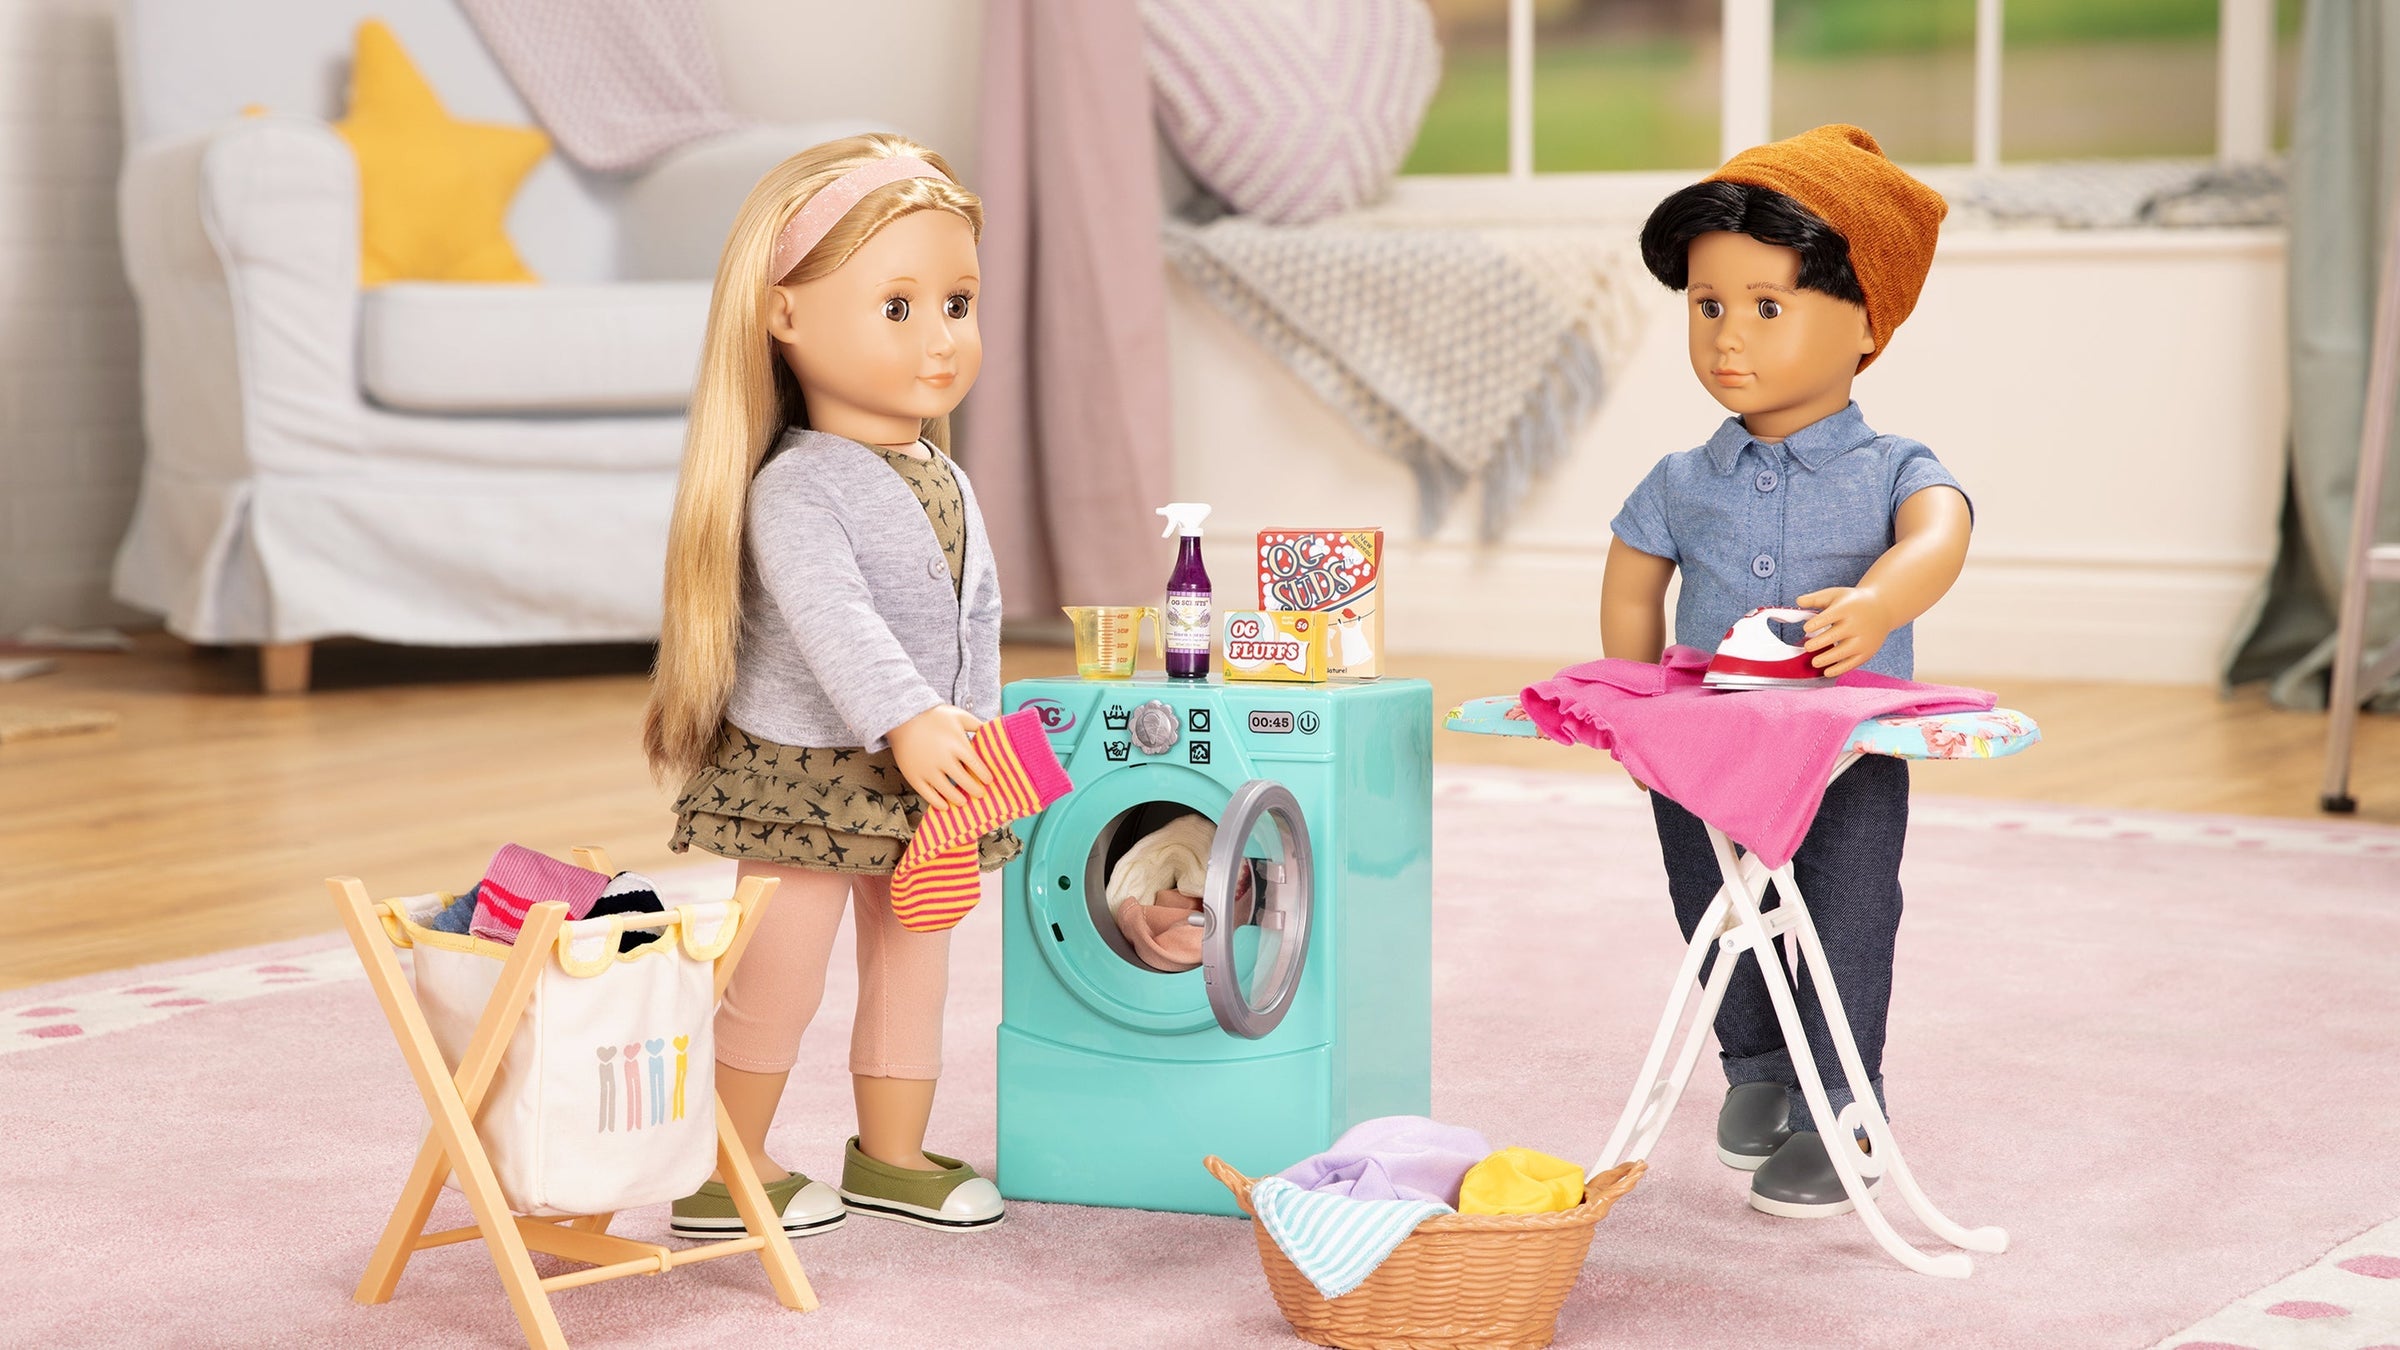 Home & Garden - Home & Gardening Accessories for 46cm Dolls - Our Generation